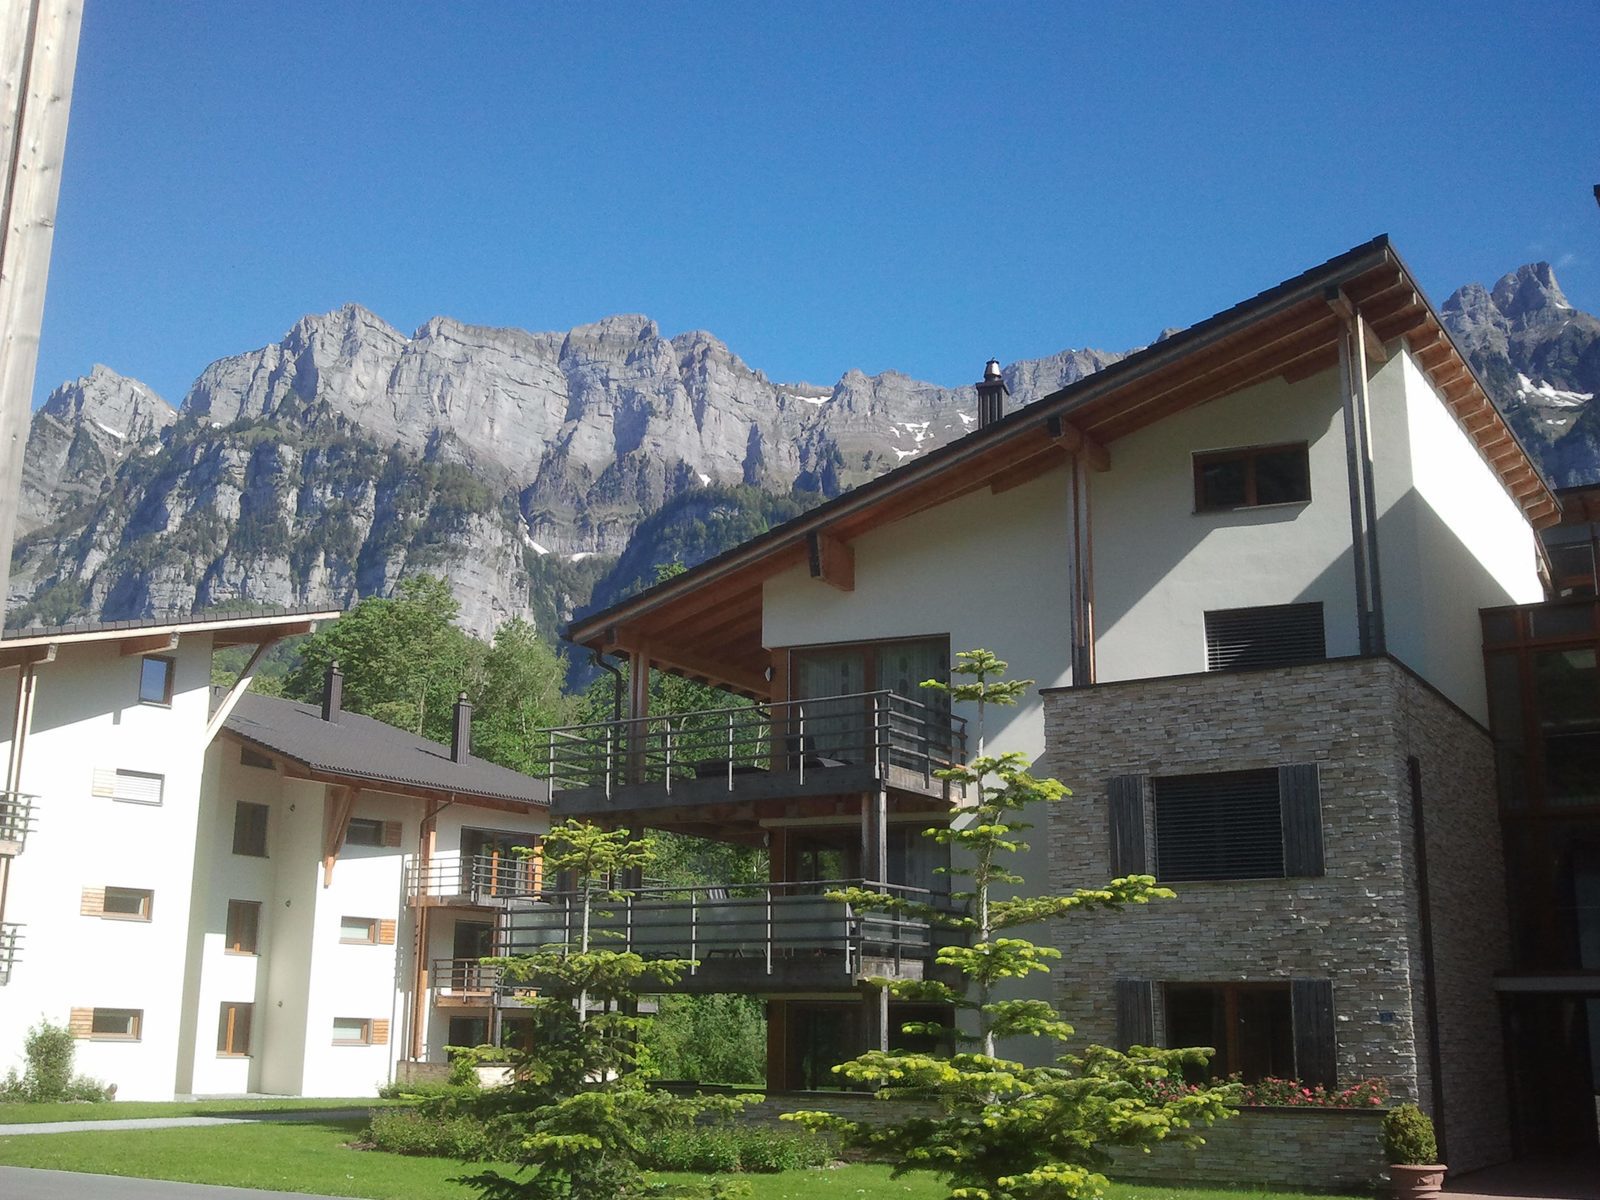 Apartments on Resort Walensee Heidiland Flumserberg Switzerland with view over the Churfirsten, during the May holiday